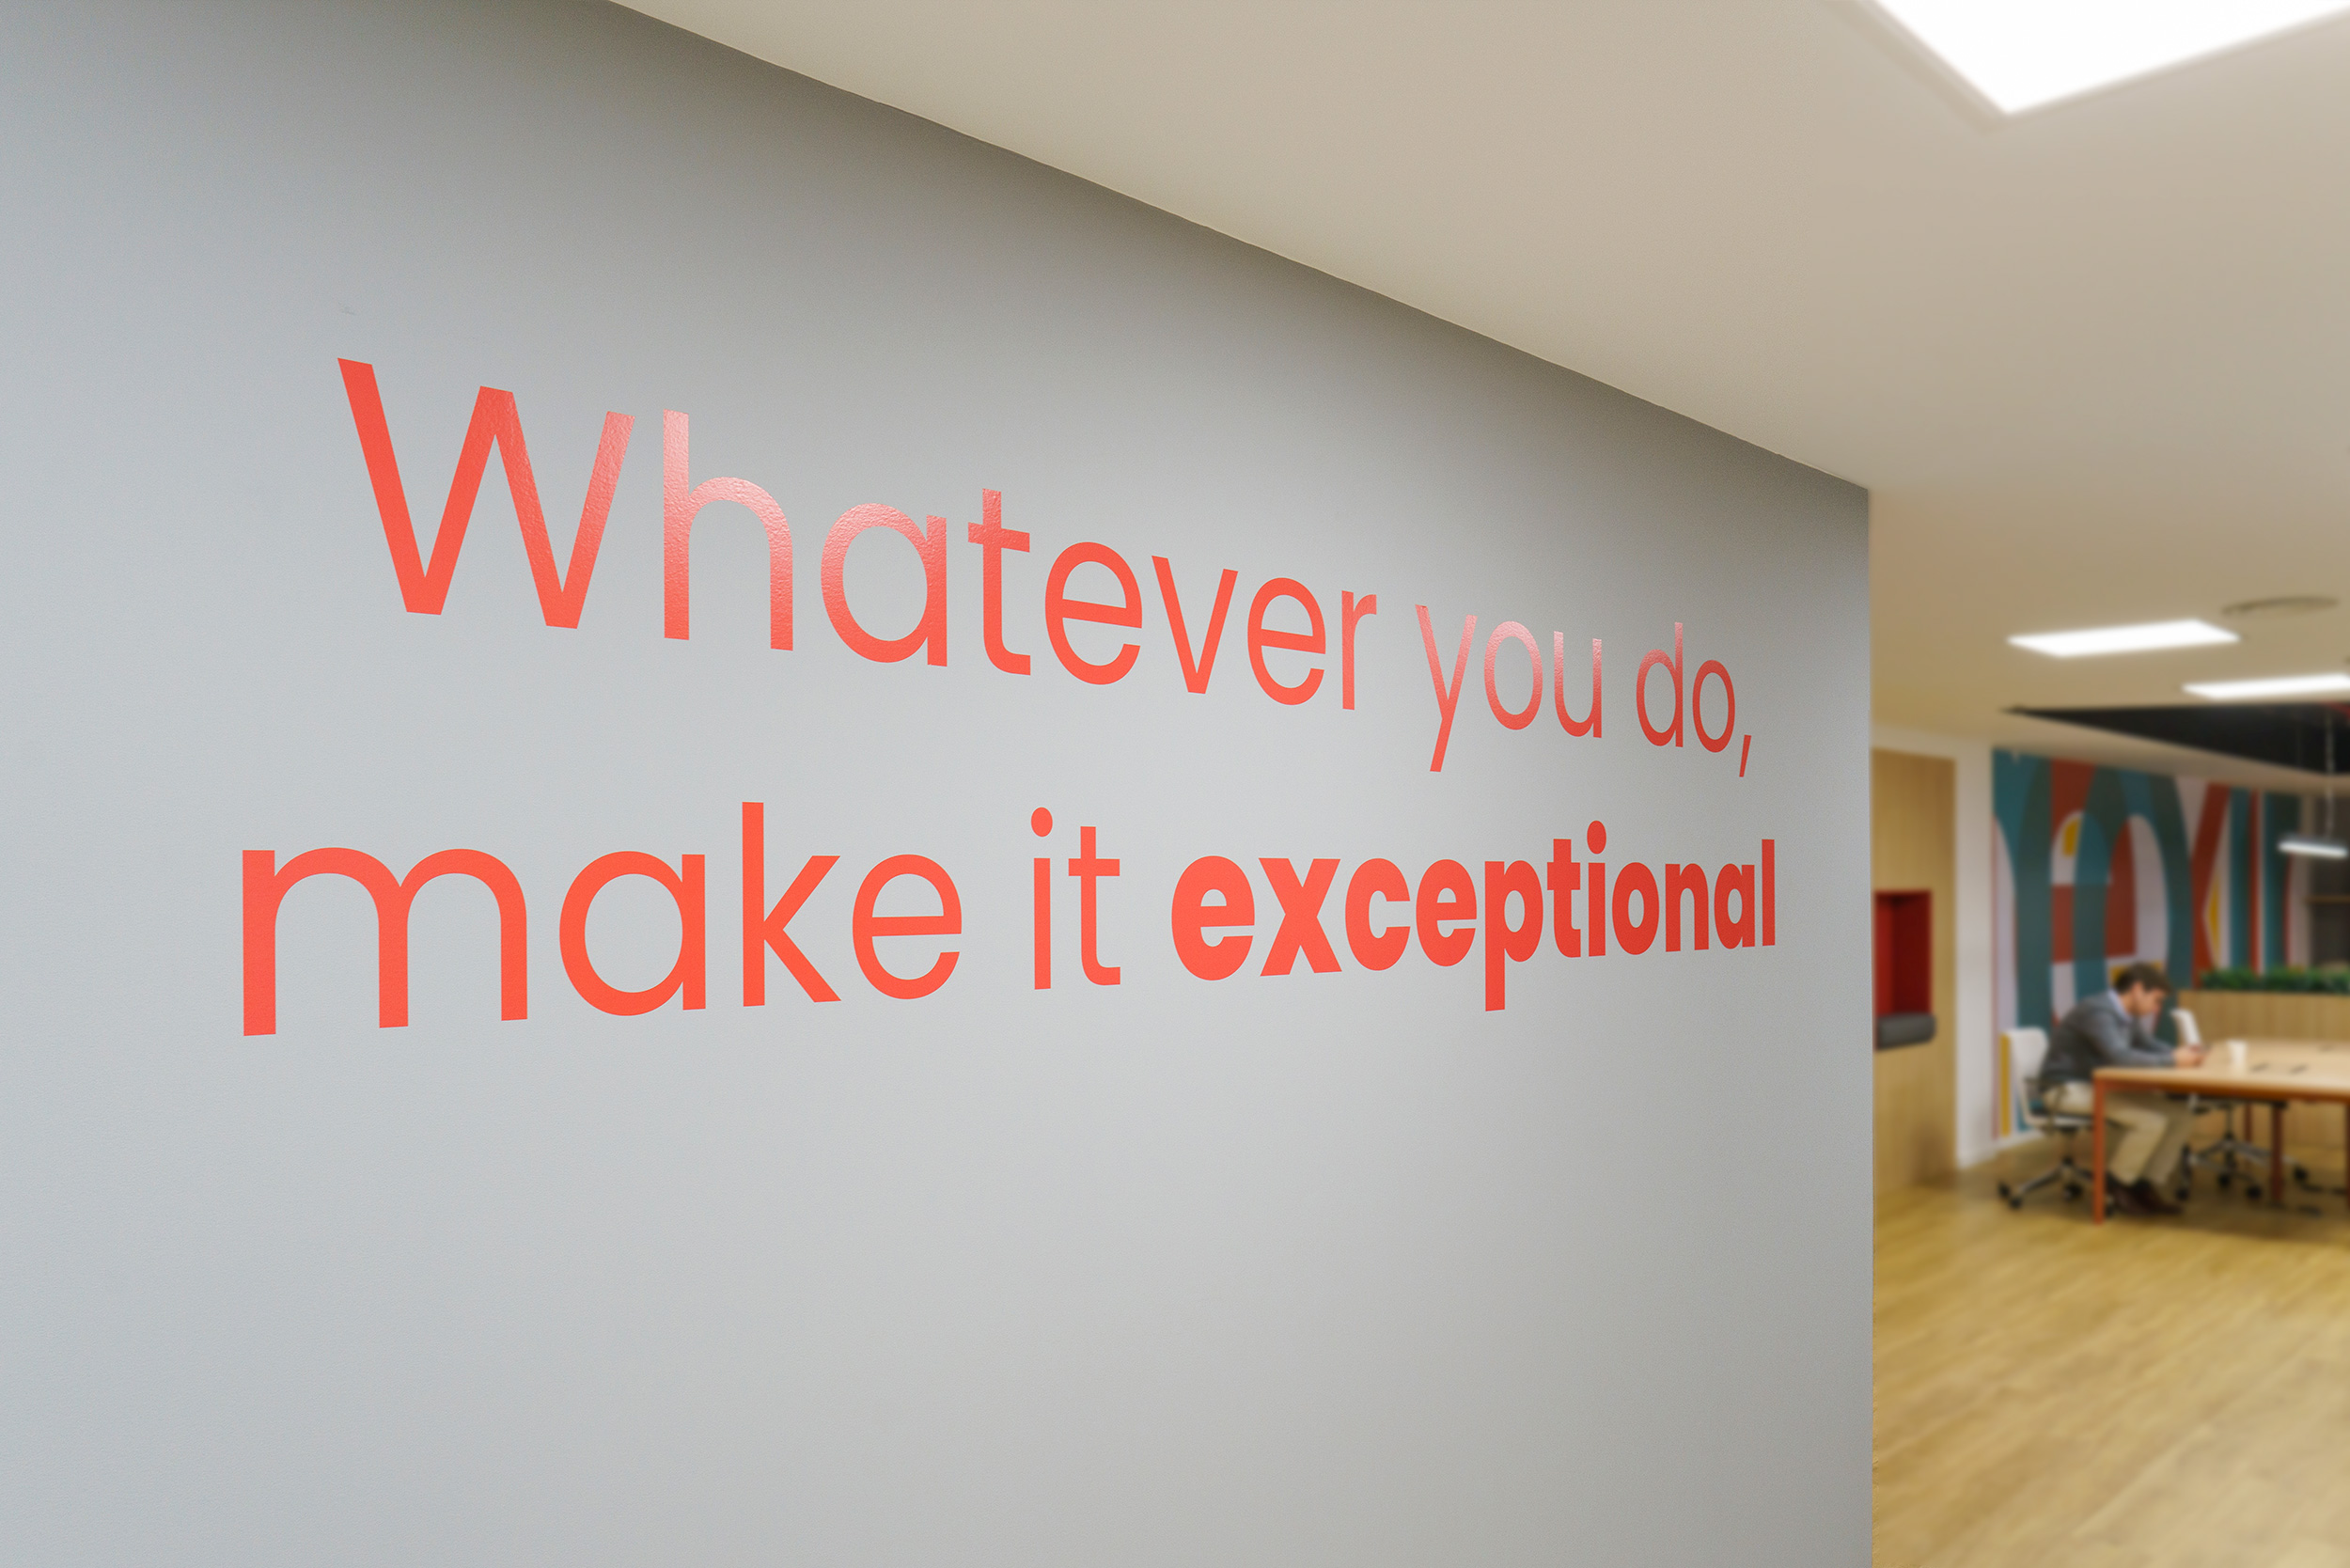 Office interior design: having a branded office is really that important?